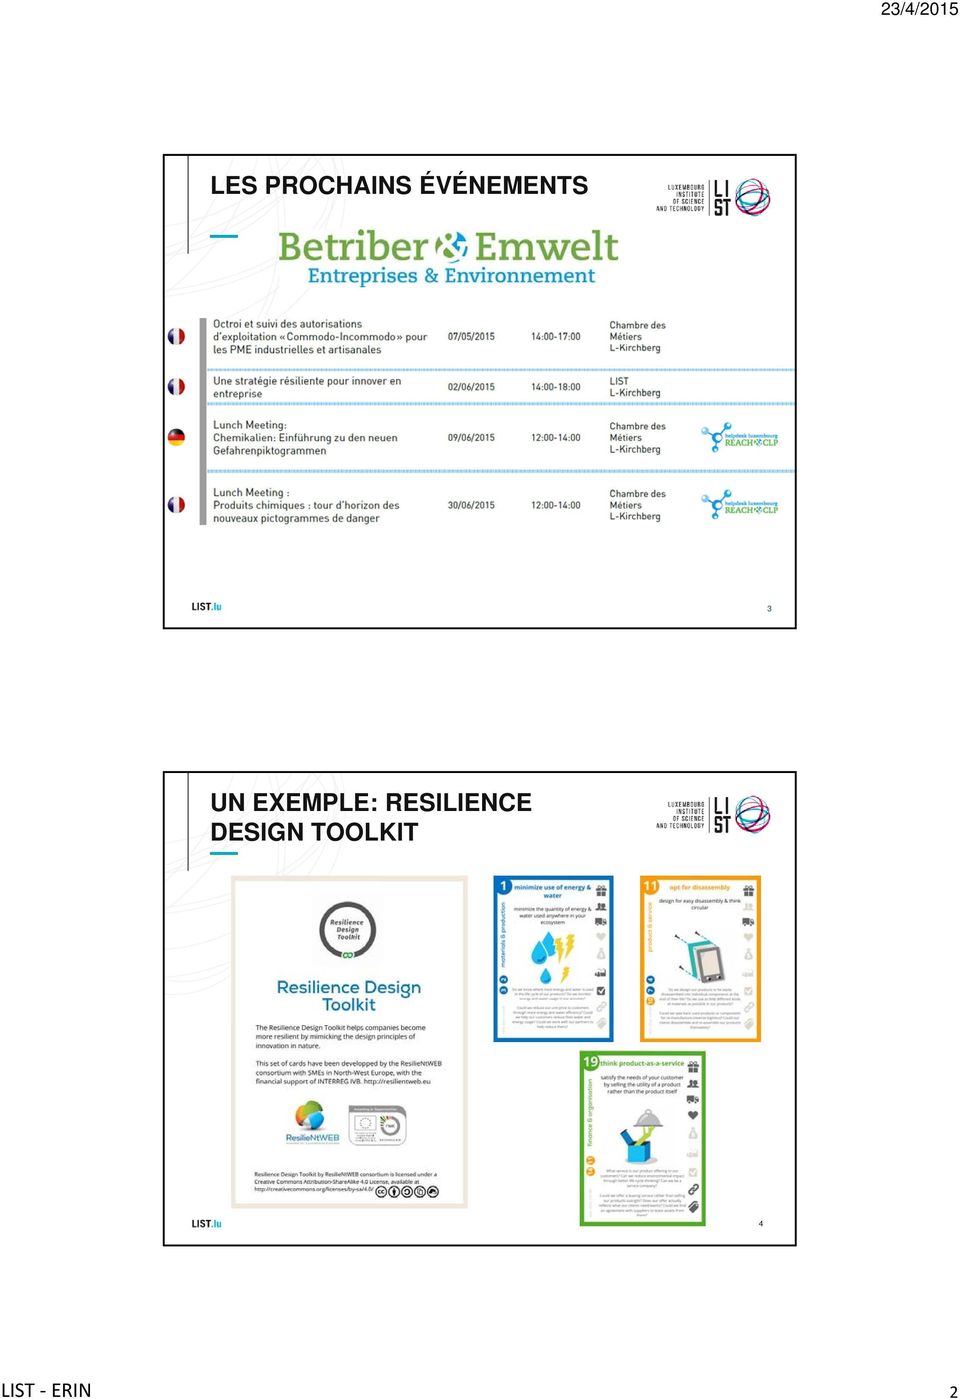 EXEMPLE: RESILIENCE